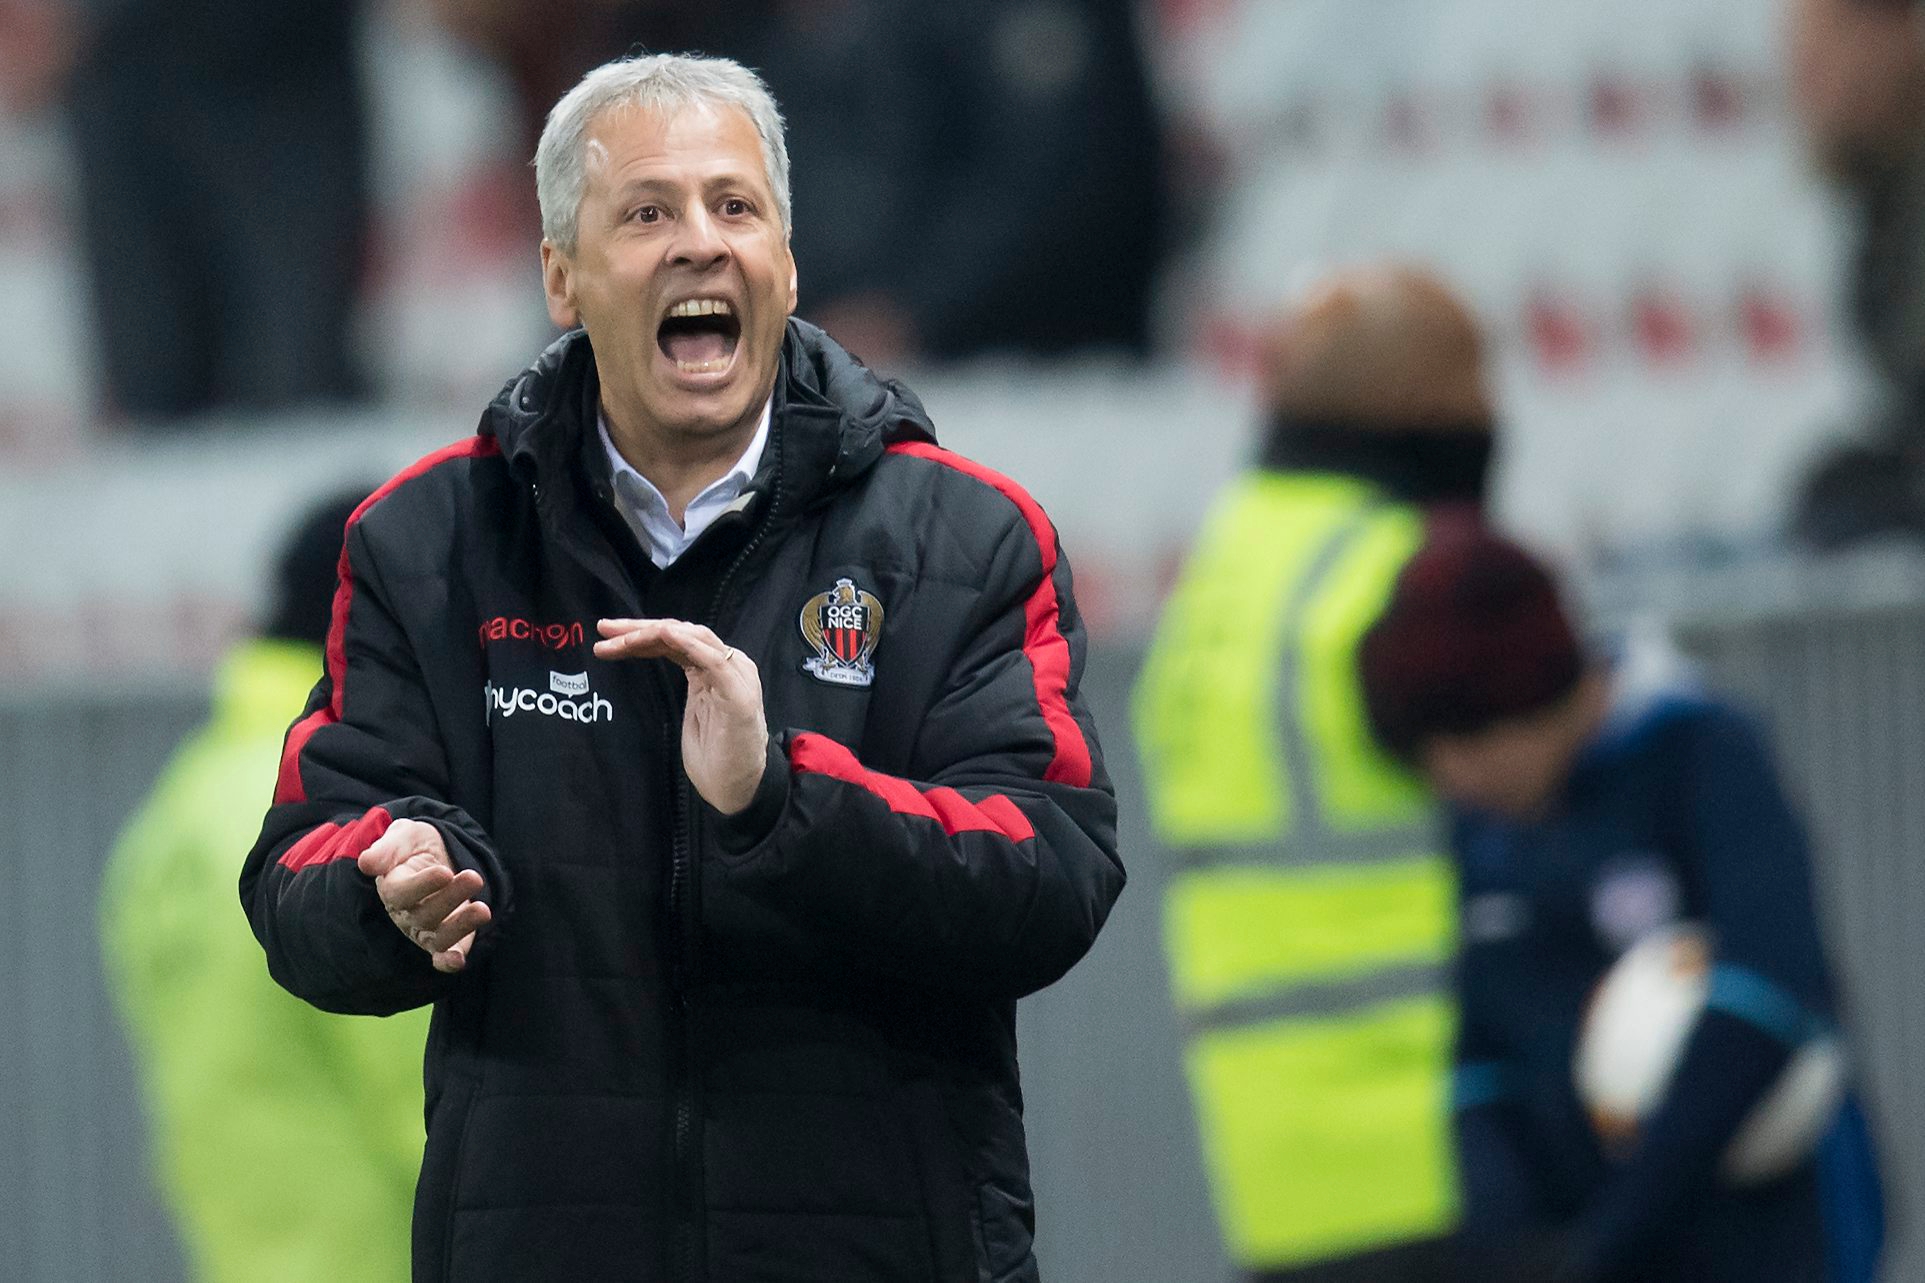 OGC Nice's Swiss head coach Lucien Favre gestures during the French Ligue 1 soccer match, between OGC Nice and  Toulouse FC, at the Allianz Riviera stadium, in Nice, France, Sunday, December 4, 2016. (KEYSTONE/Jean-Christophe Bott) FRANCE SOCCER NICE TOULOUSE